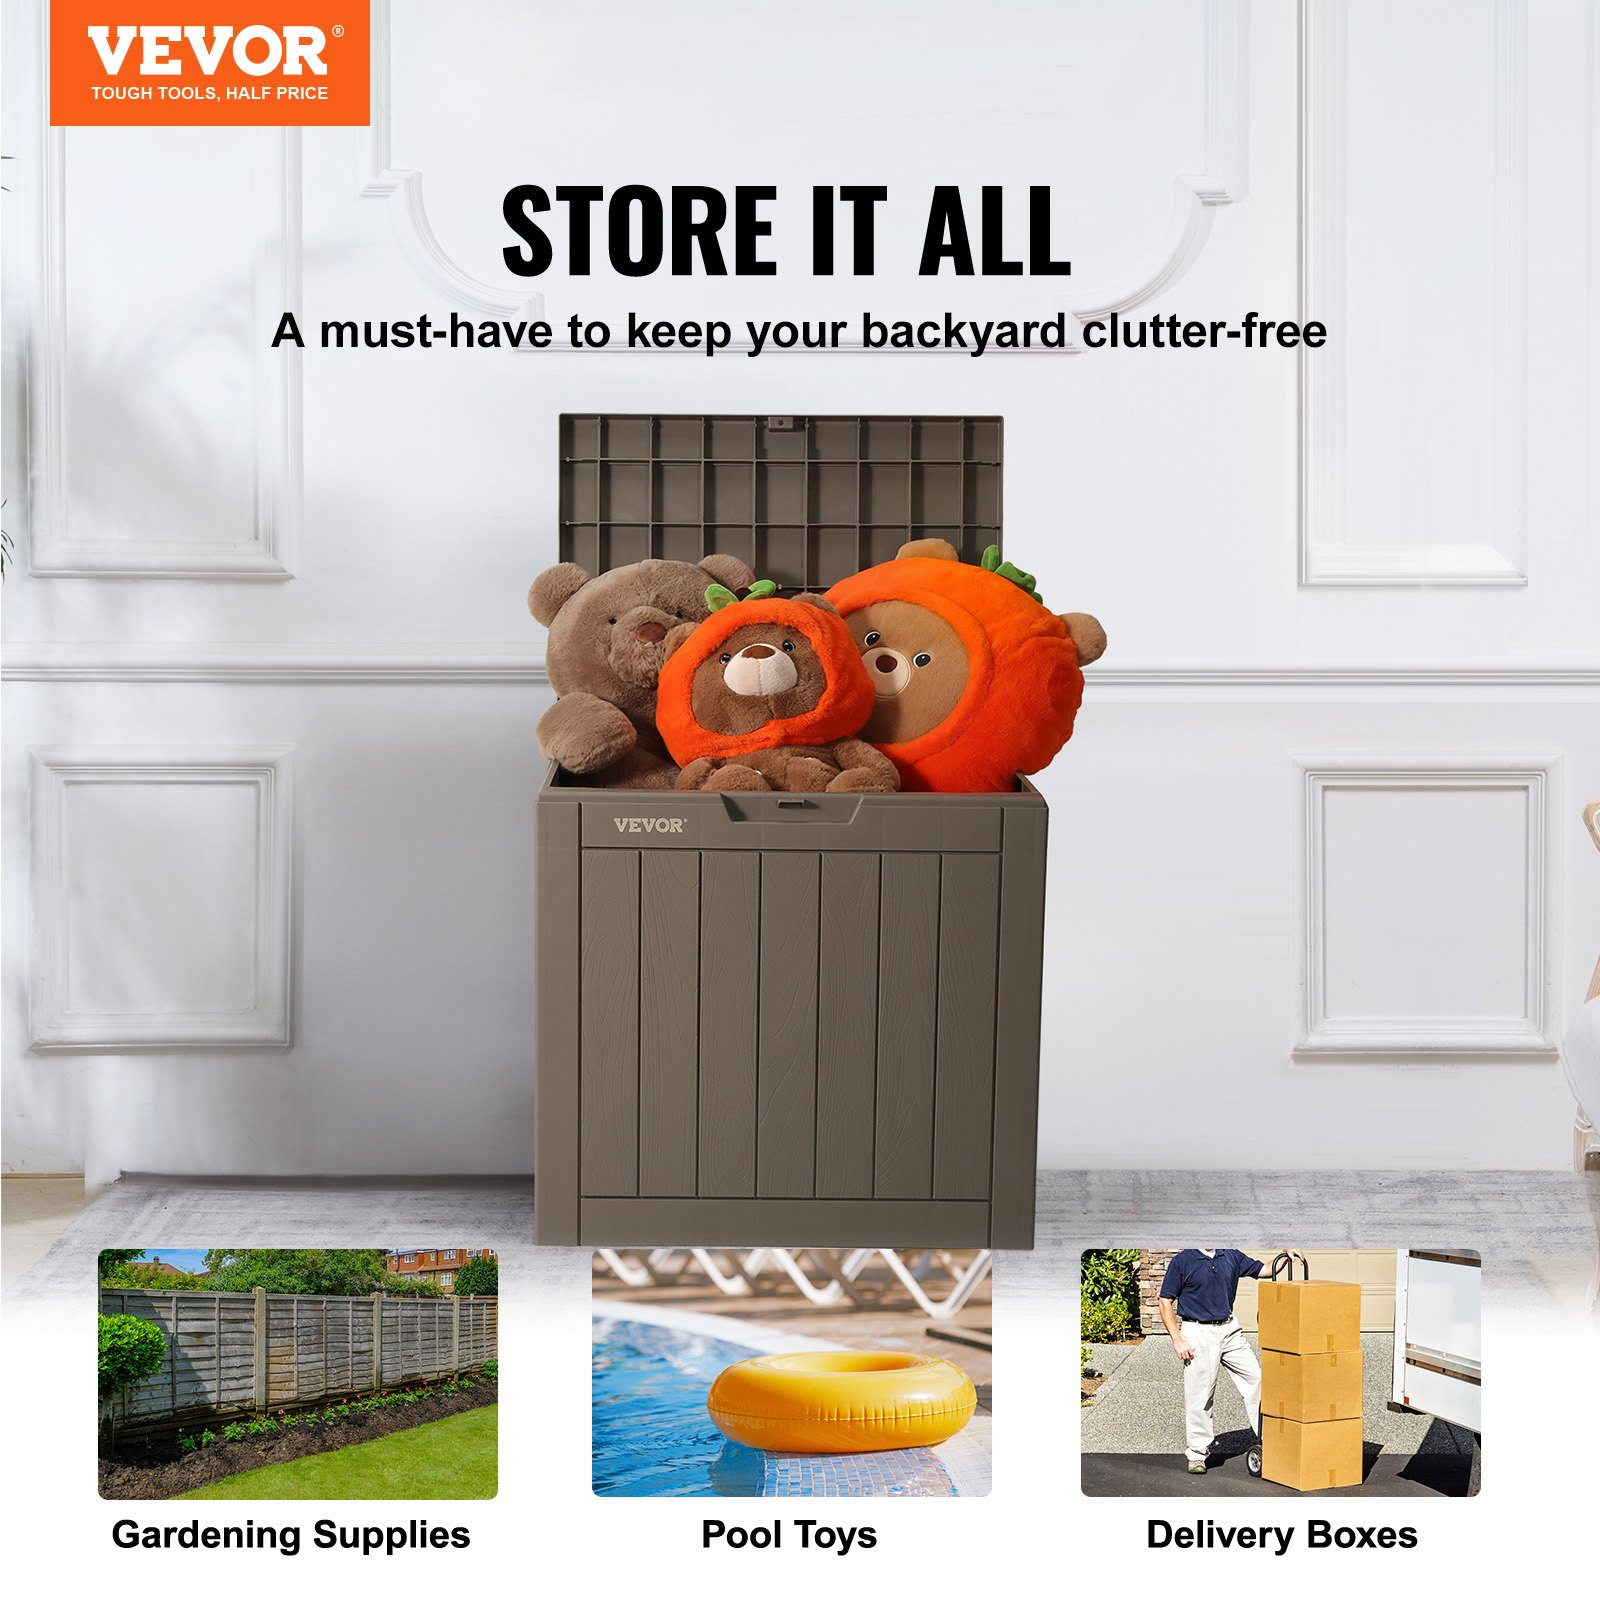 Vevor Deck Box 31 Gal VEVOR Deck Box, 31 Gallon Outdoor Storage Box, 22.1" x 17.1" x 20.9" , Waterproof PP Deckbox with Aluminum Alloy Padlock, for Patio Furniture, Pool Toys, Garden Tools, Outdoor Cushions, Gray